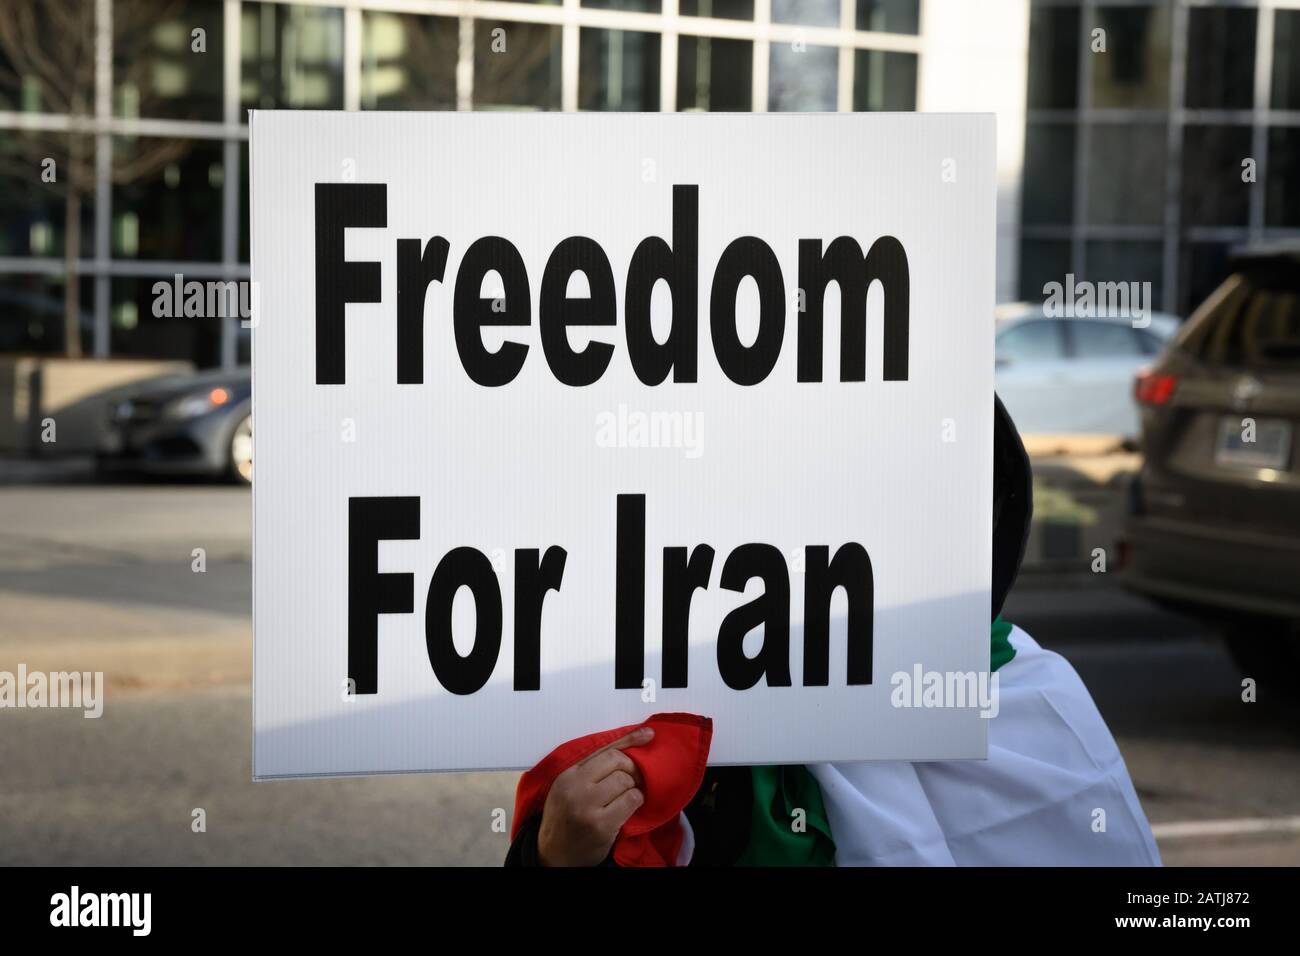 A woman holds up a sign calling for Freedom For Iran in solidarity with Iranian protesters against the authoritarian regime at a protest in Toronto ON Stock Photo